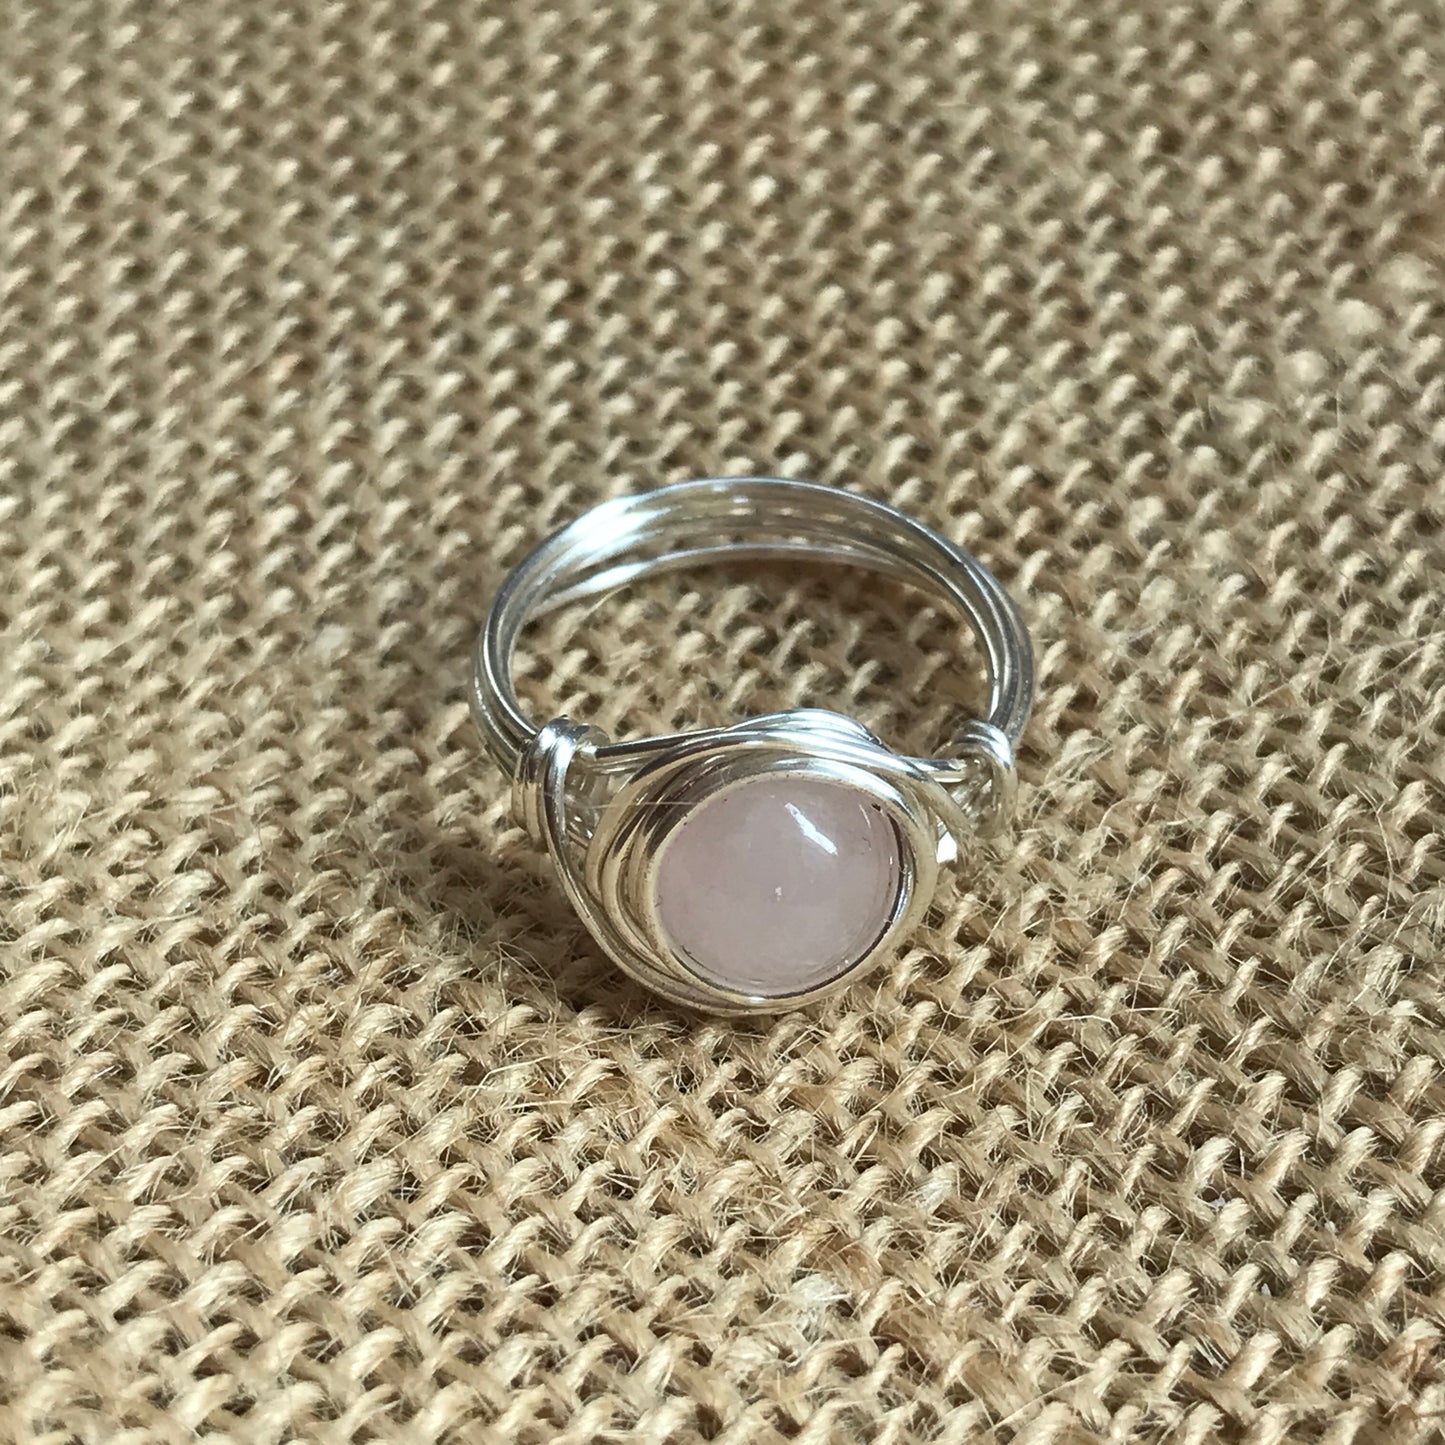 Rose Quartz Wire Wrapped Ring